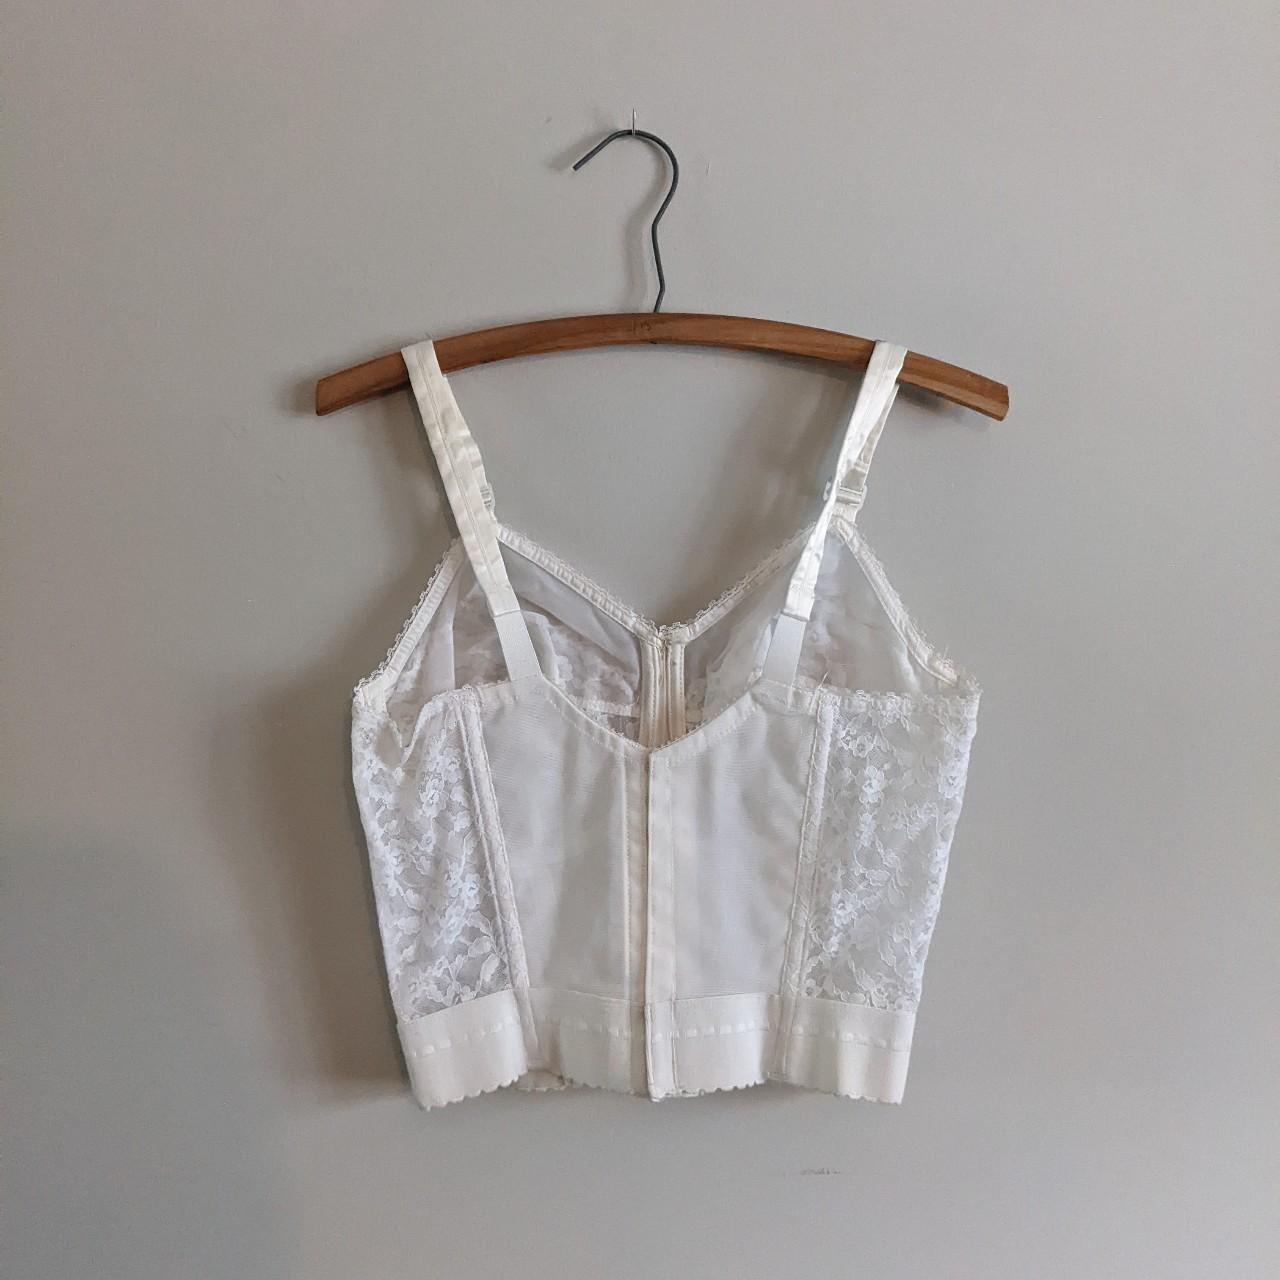 Product Image 2 - Vintage White Lace Bustier by